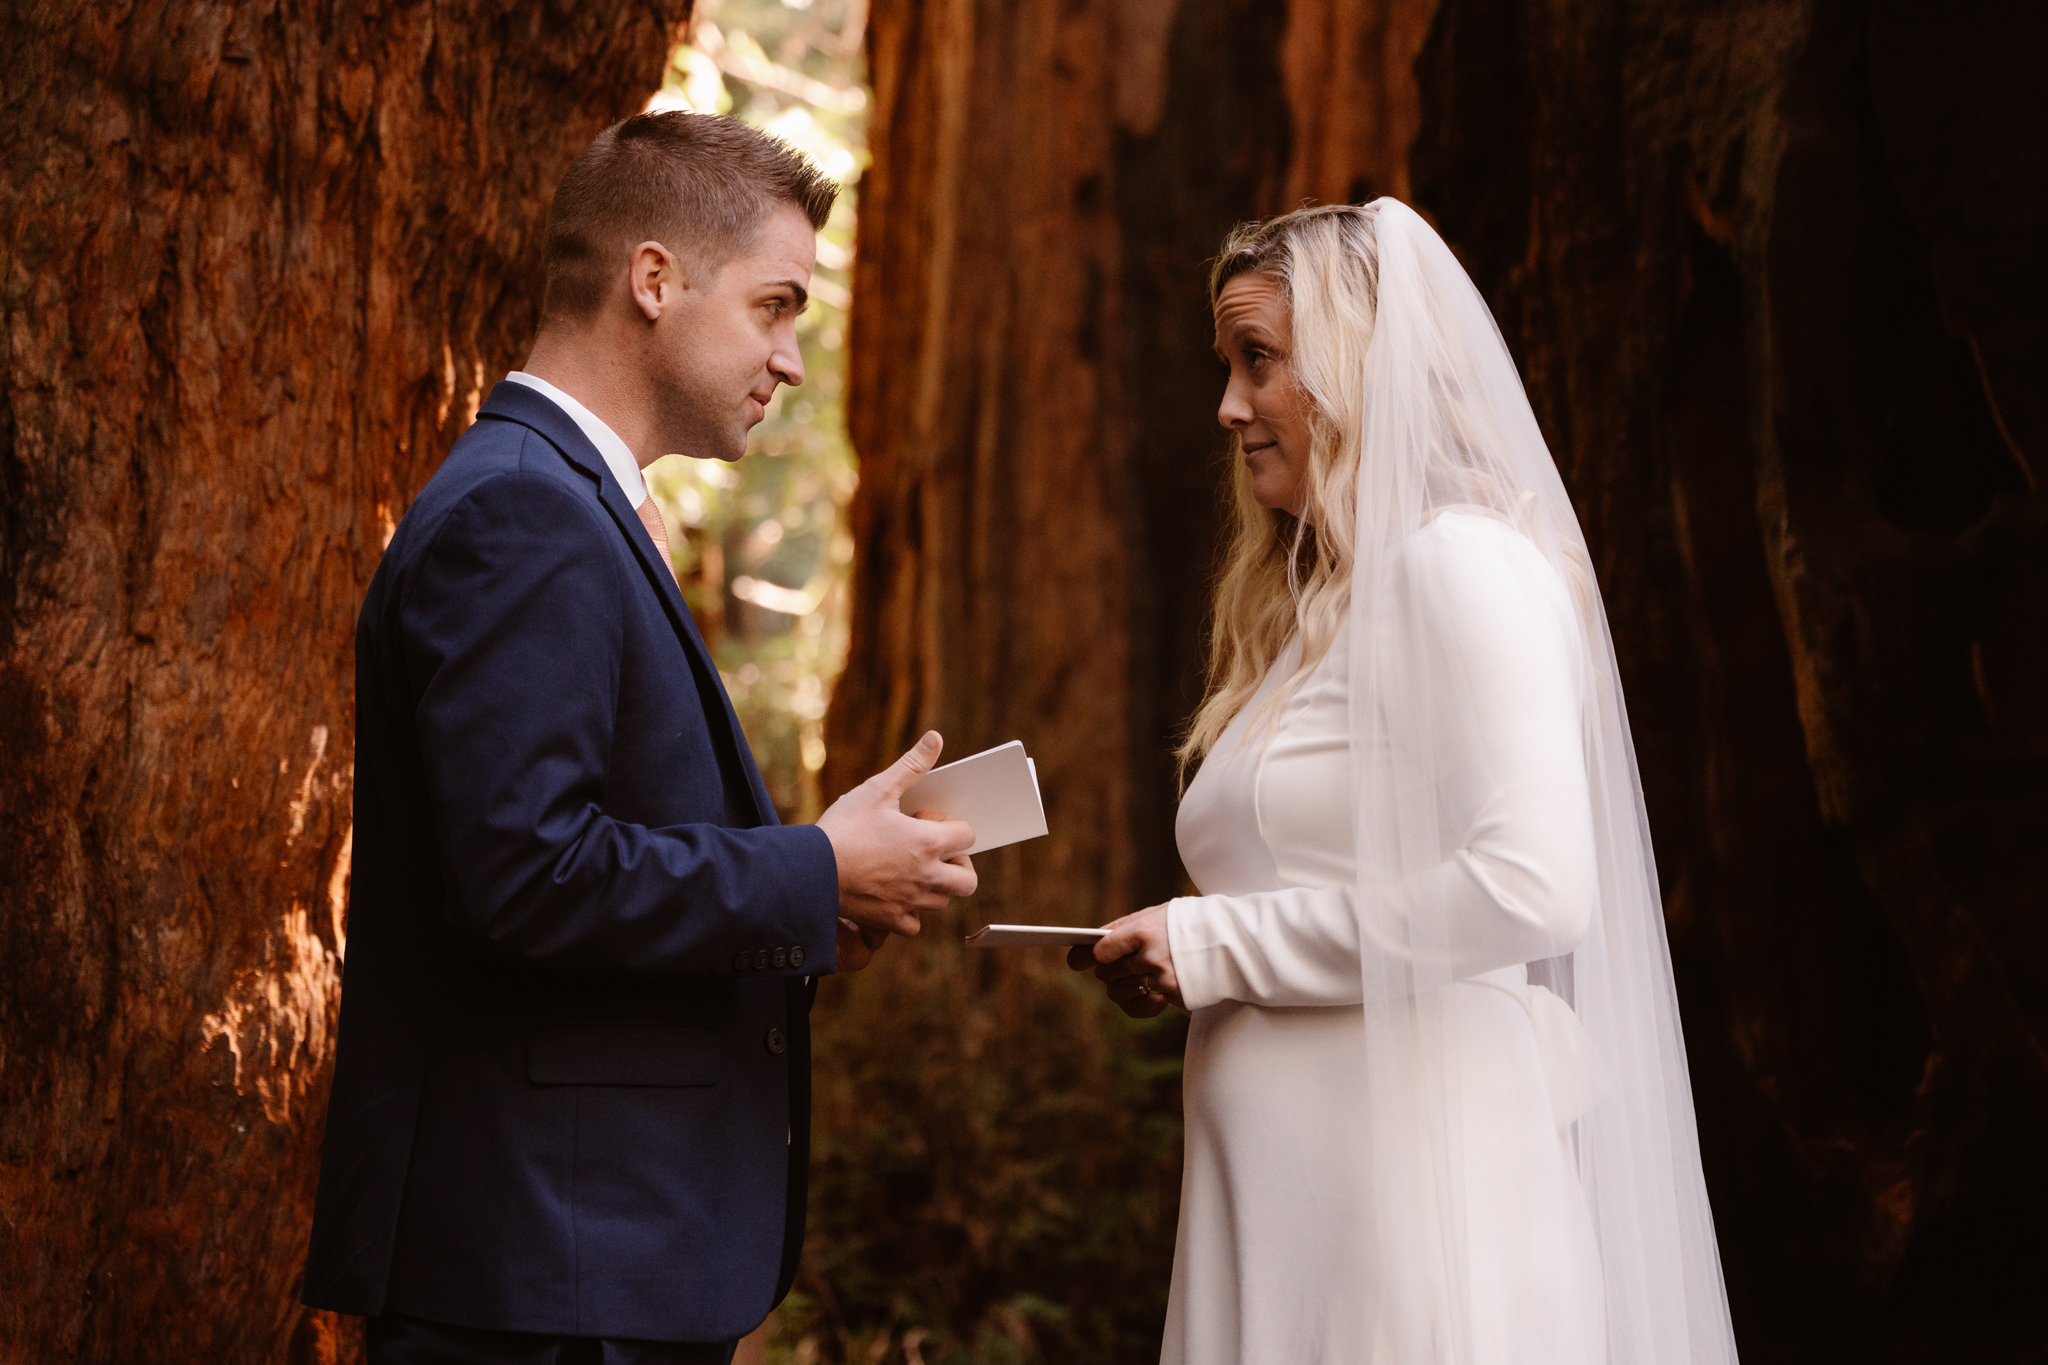 The couple faces each other, exchanging vows and holding hands inside the hollow of a giant redwood tree, with sunlight filtering through the forest.